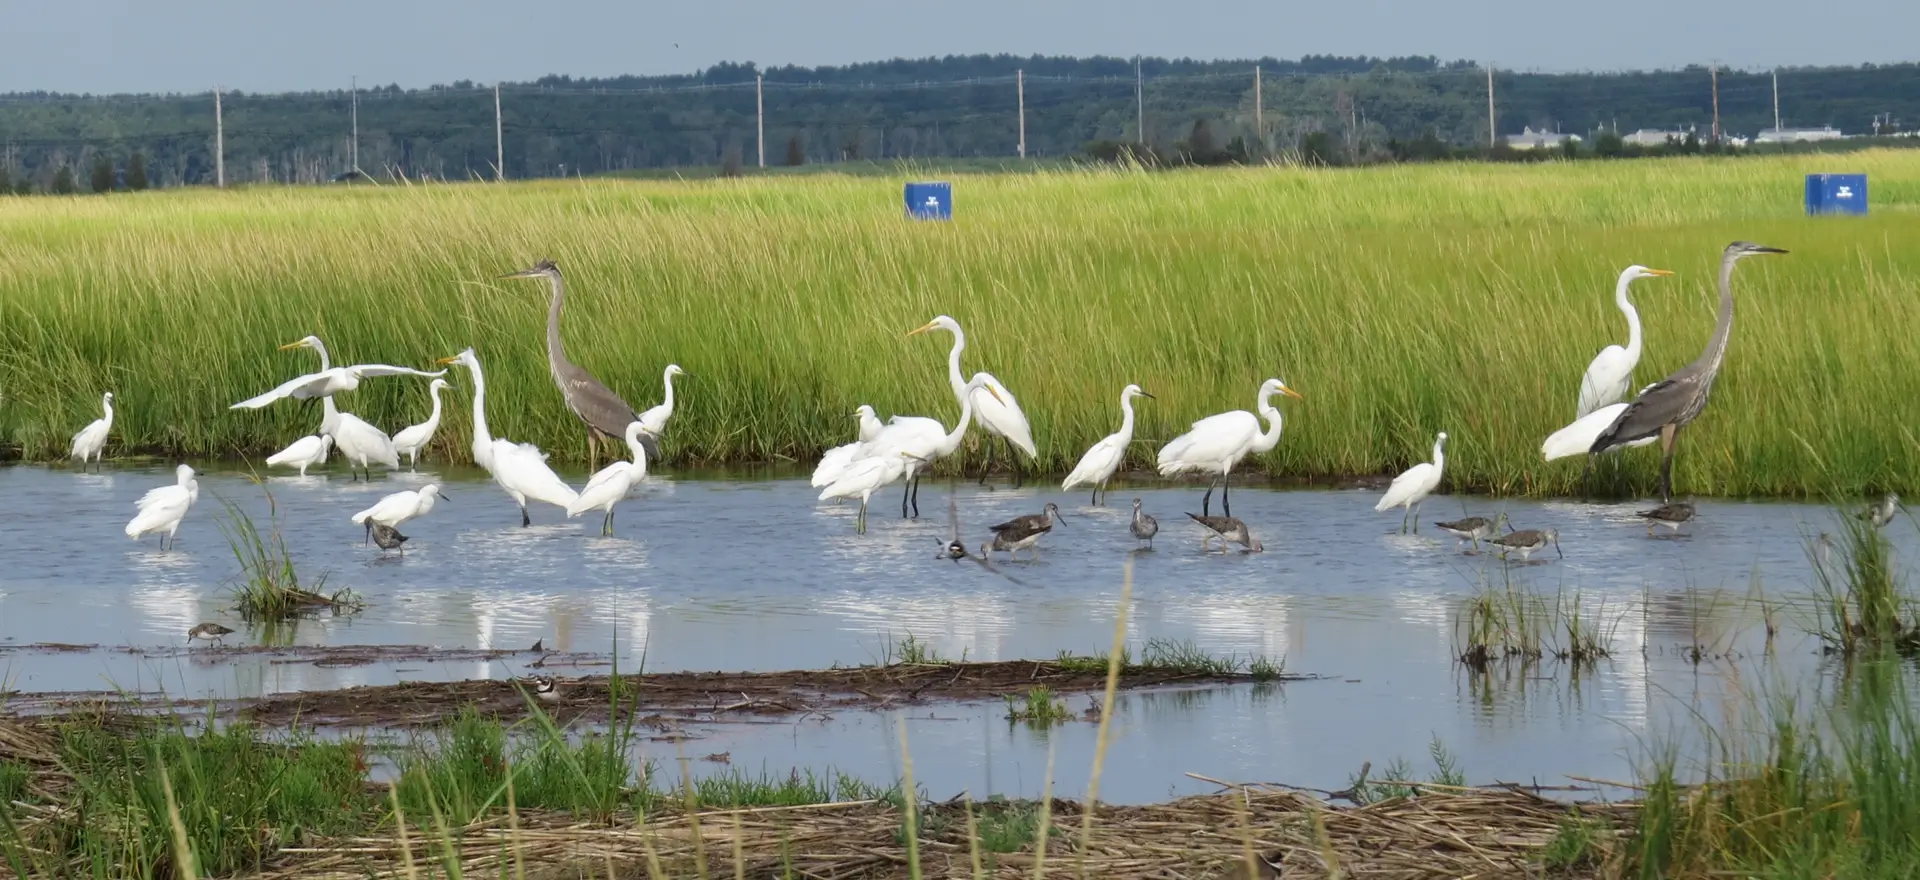 Migrating herons, egrets, and shorebirds gather in a New Hampshire salt marsh pool to feed in late summer. Photo credit: Pam Hunt